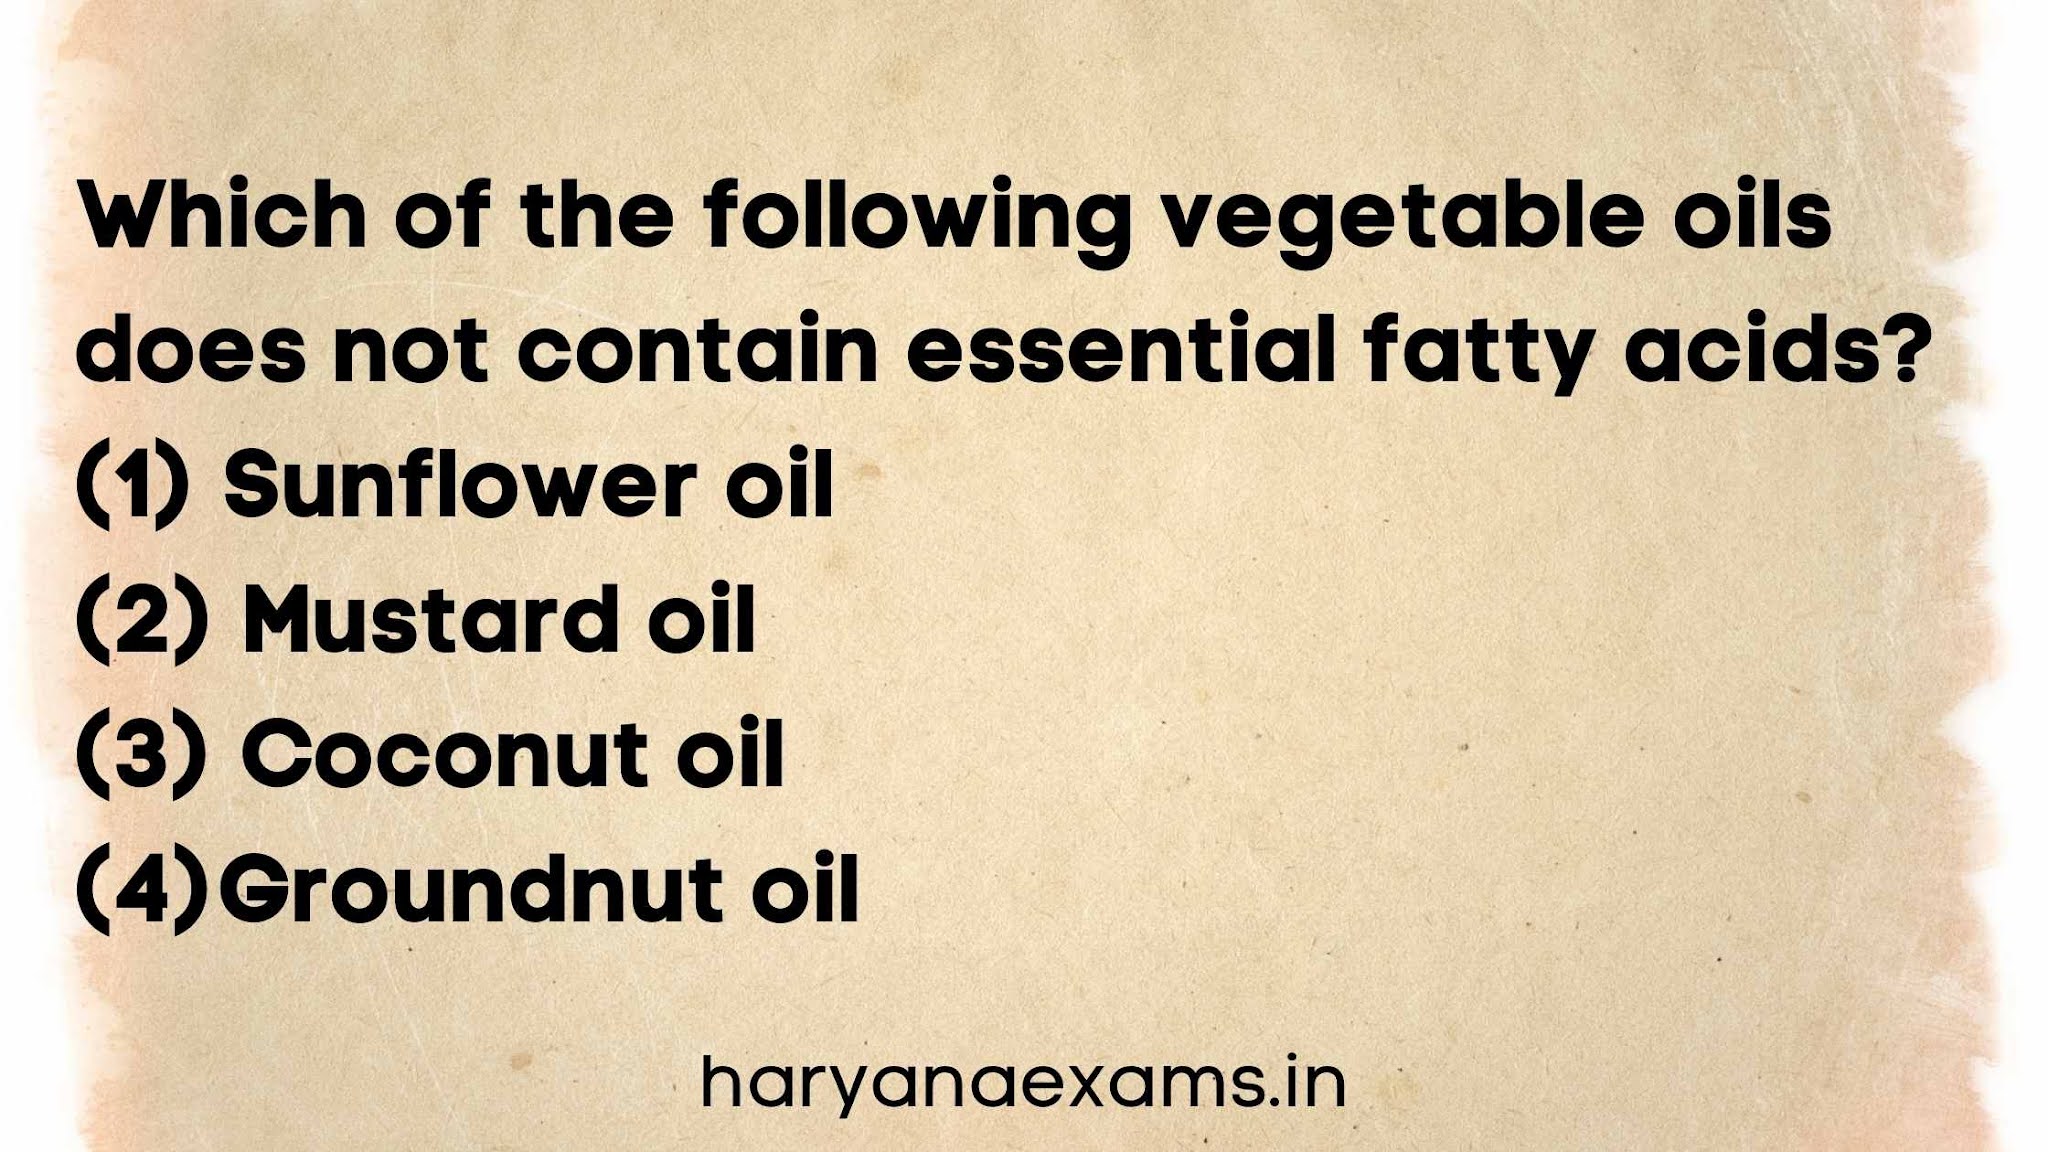 Which of the following vegetable oils does not contain essential fatty acids?   (1) Sunflower oil   (2) Mustard oil   (3) Coconut oil  (4)Groundnut oil